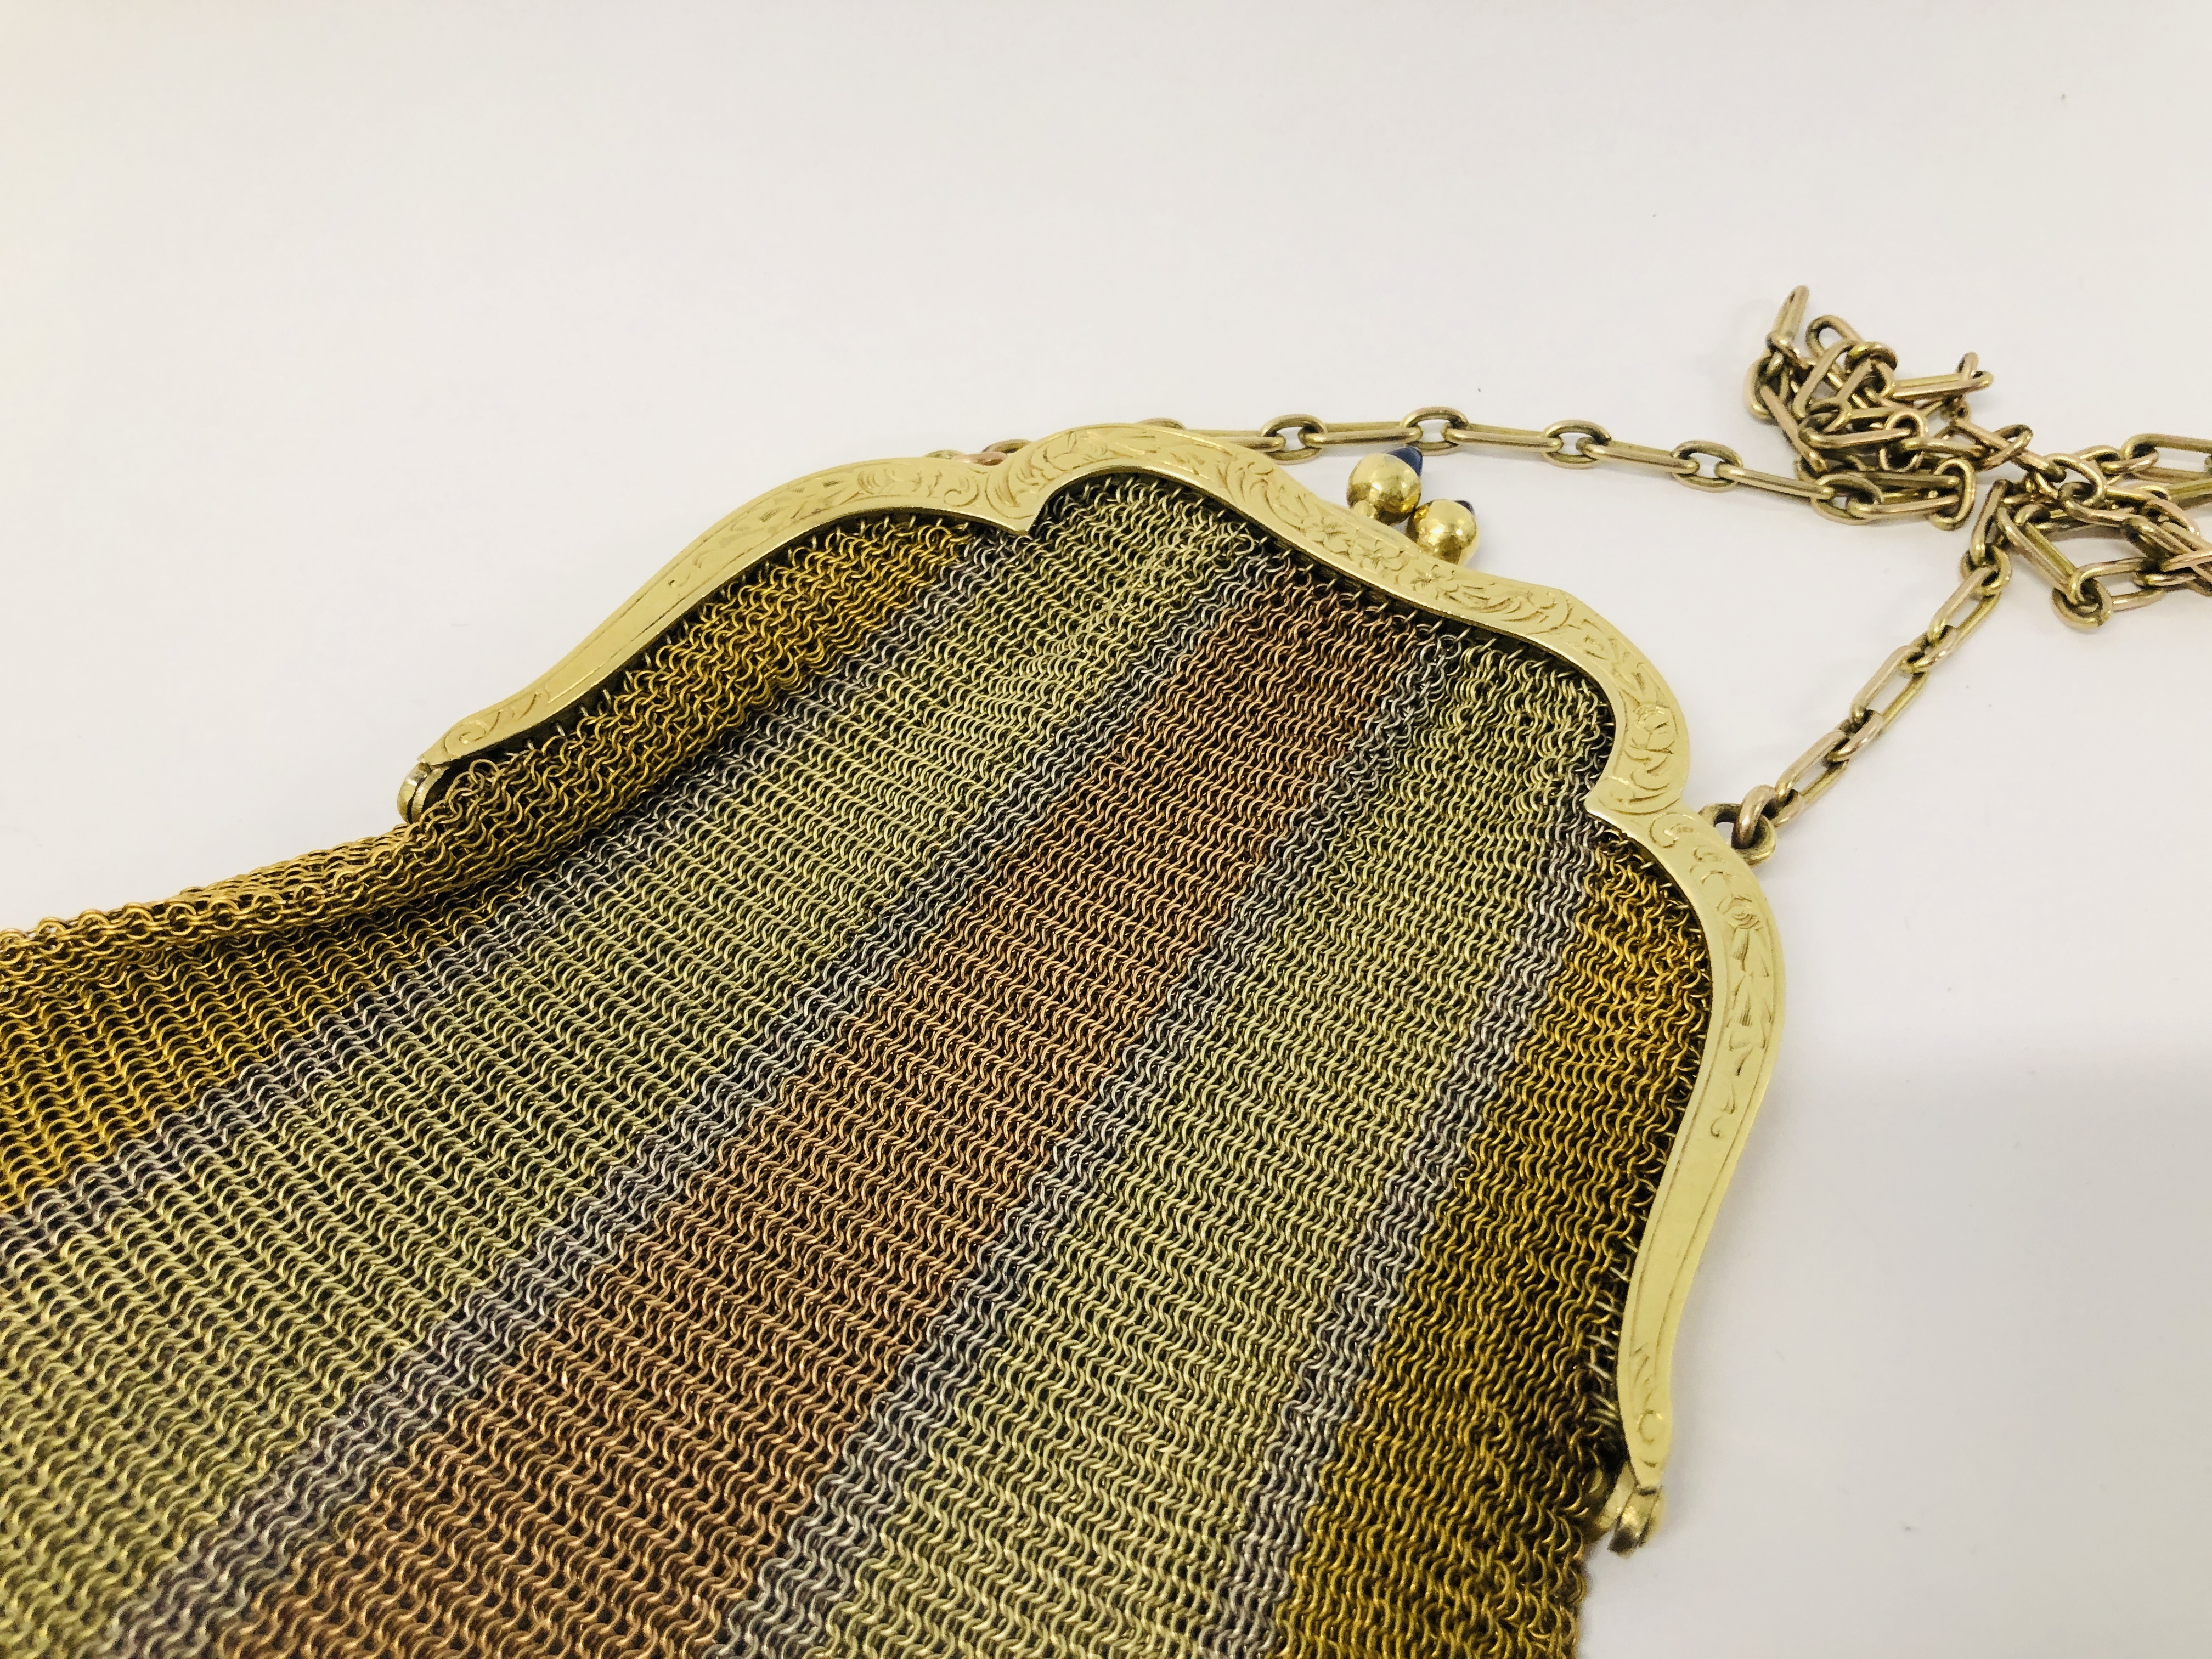 VINTAGE CHAIN MAIL PURSES YELLOW METAL TRI-COLOURED DESIGN (INDISTINCT MARKS). - Image 4 of 9